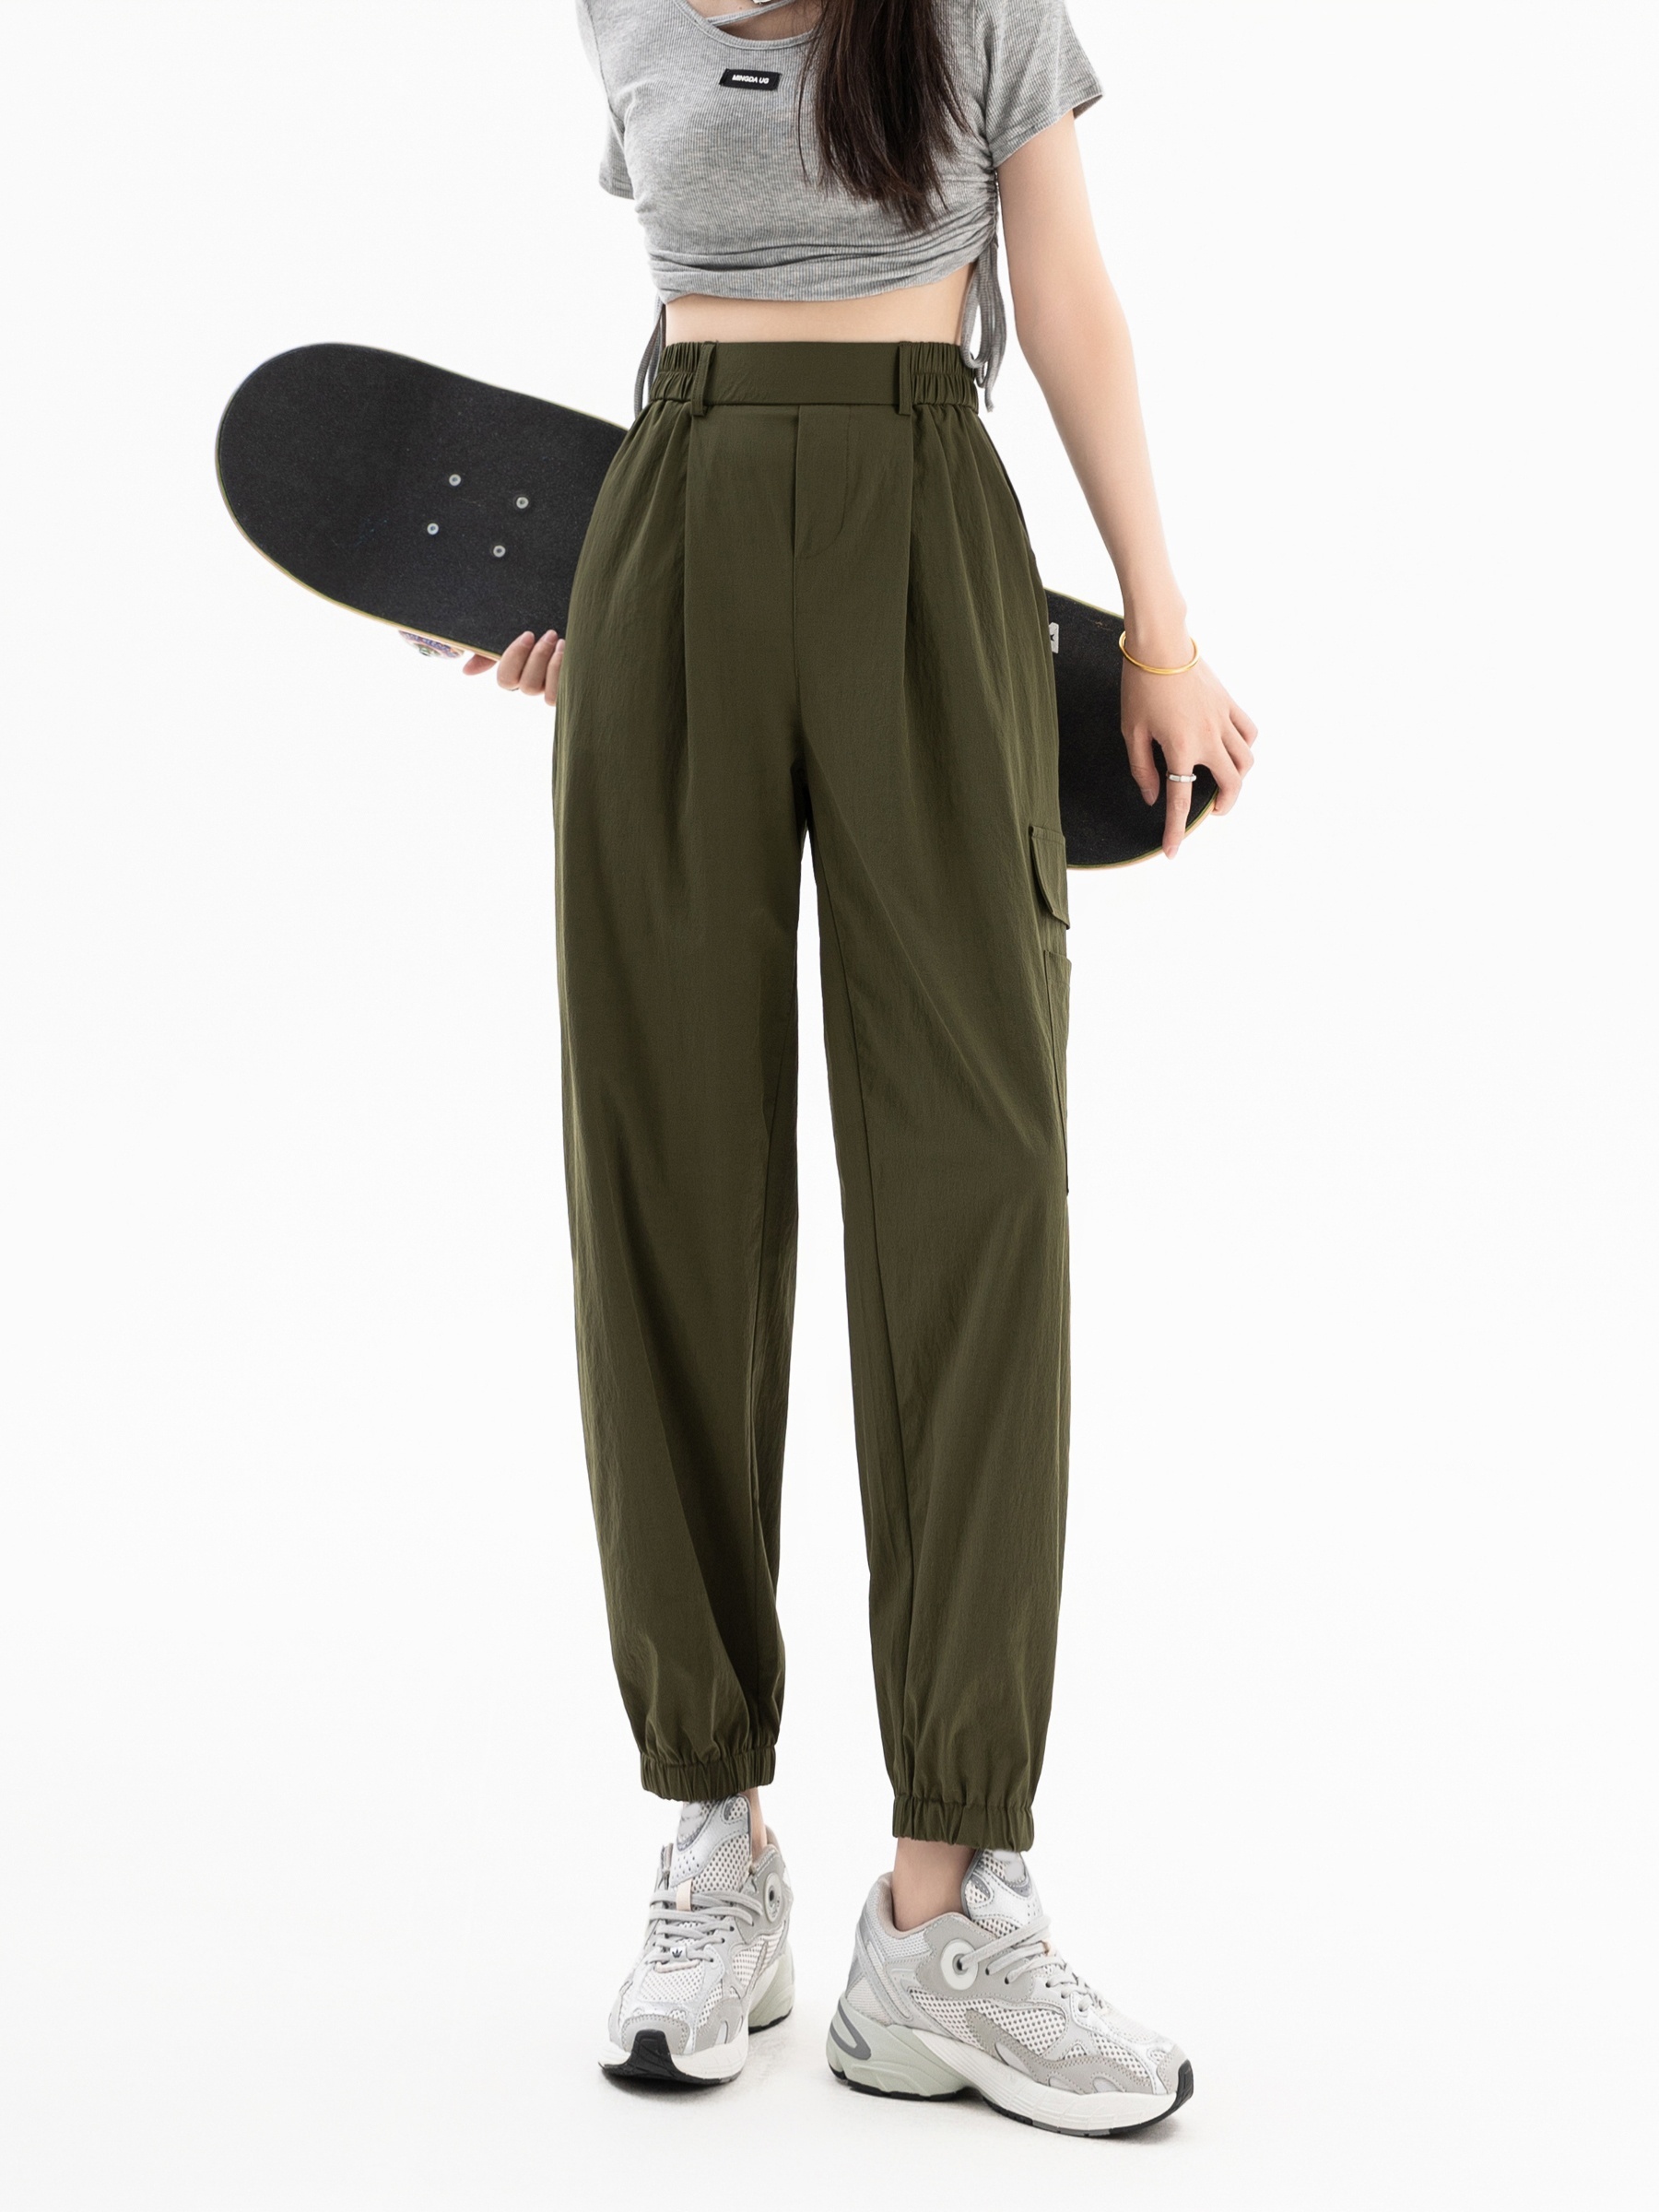 Solid High Waist Flap Pocket Cargo Trousers  Cargo pants women outfit, Cargo  pants outfit, Green cargo pants